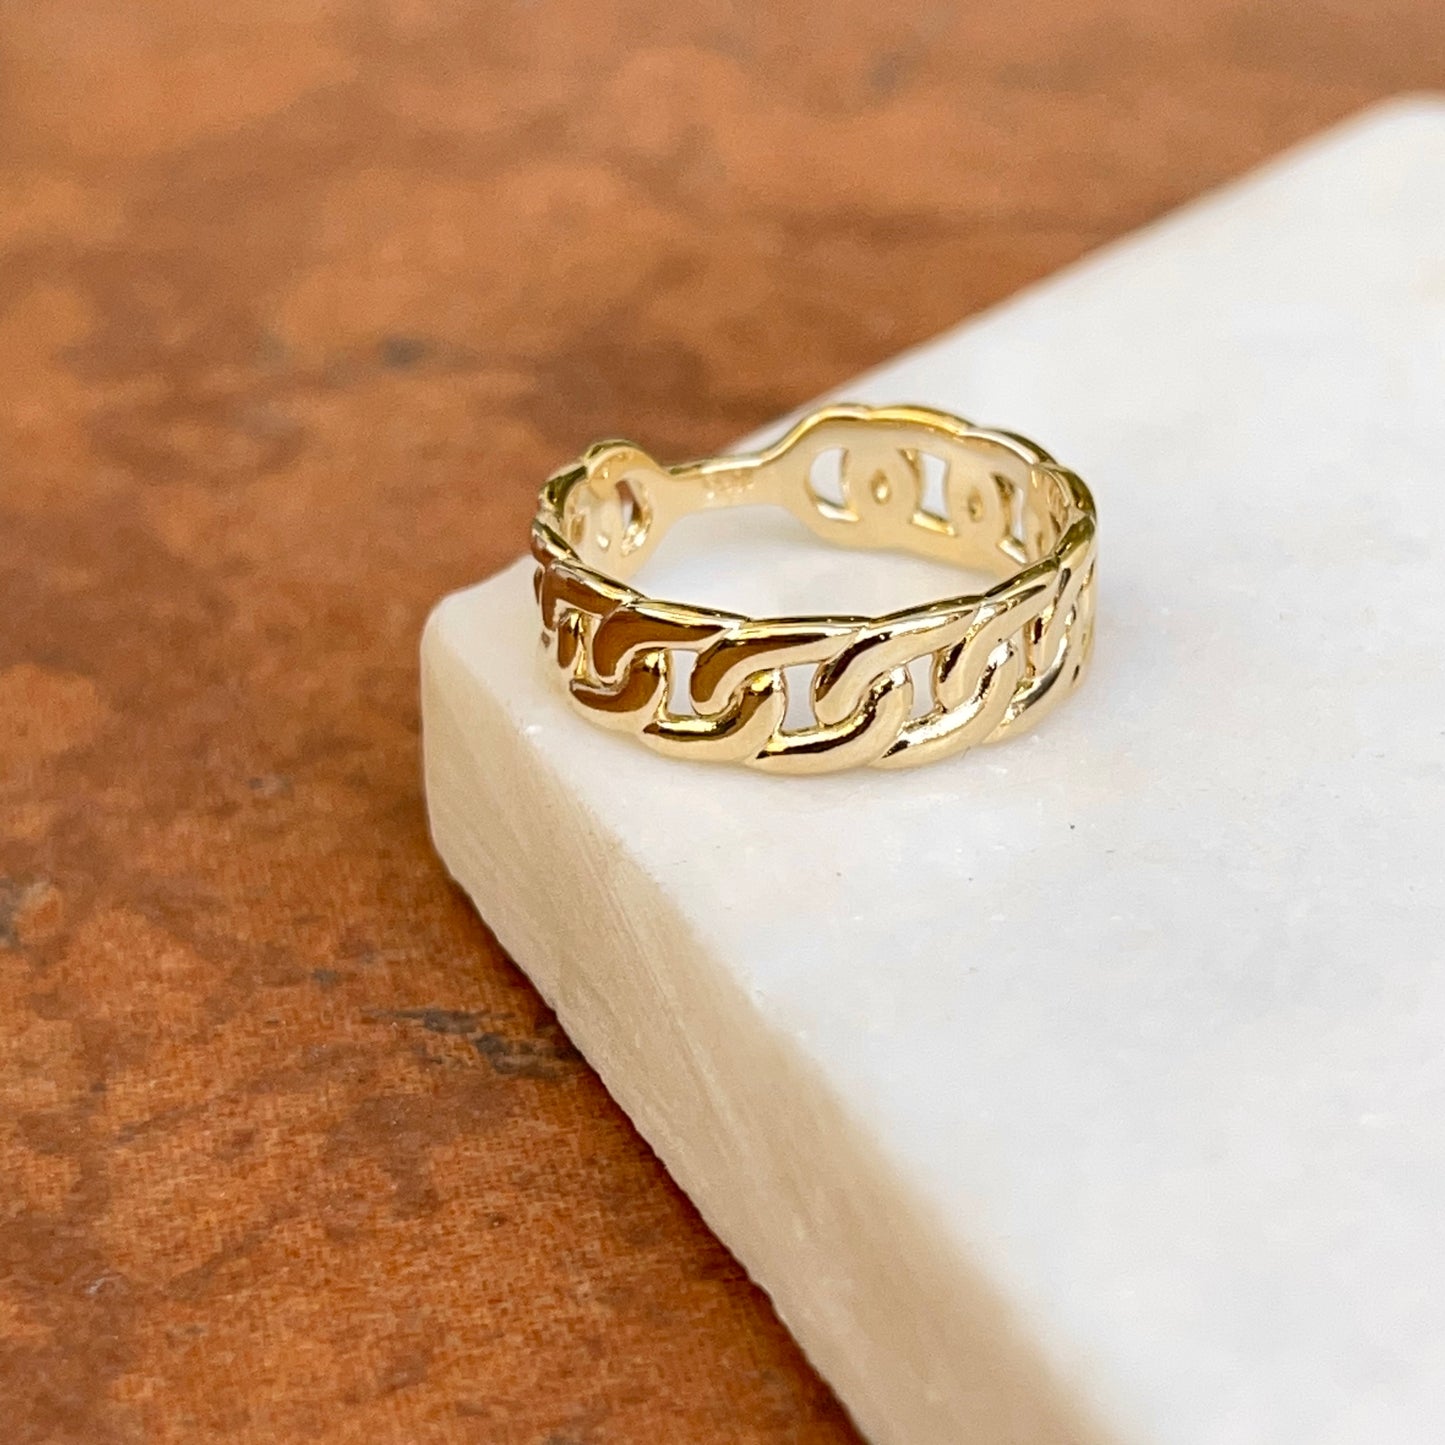 10KT Yellow Gold Chain Link Band Ring